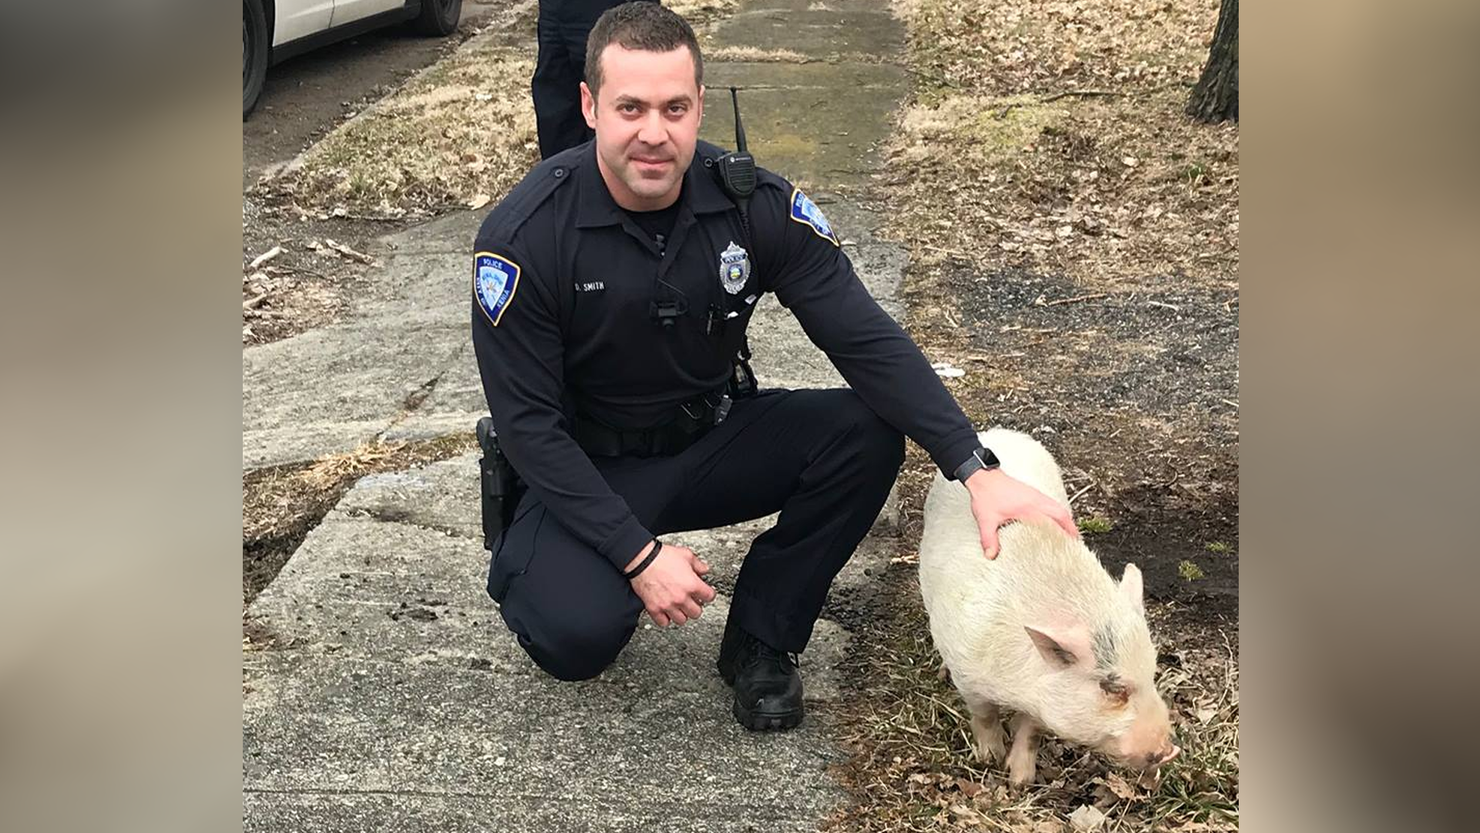 Ohio Police Officer lures runaway pig home using pizza